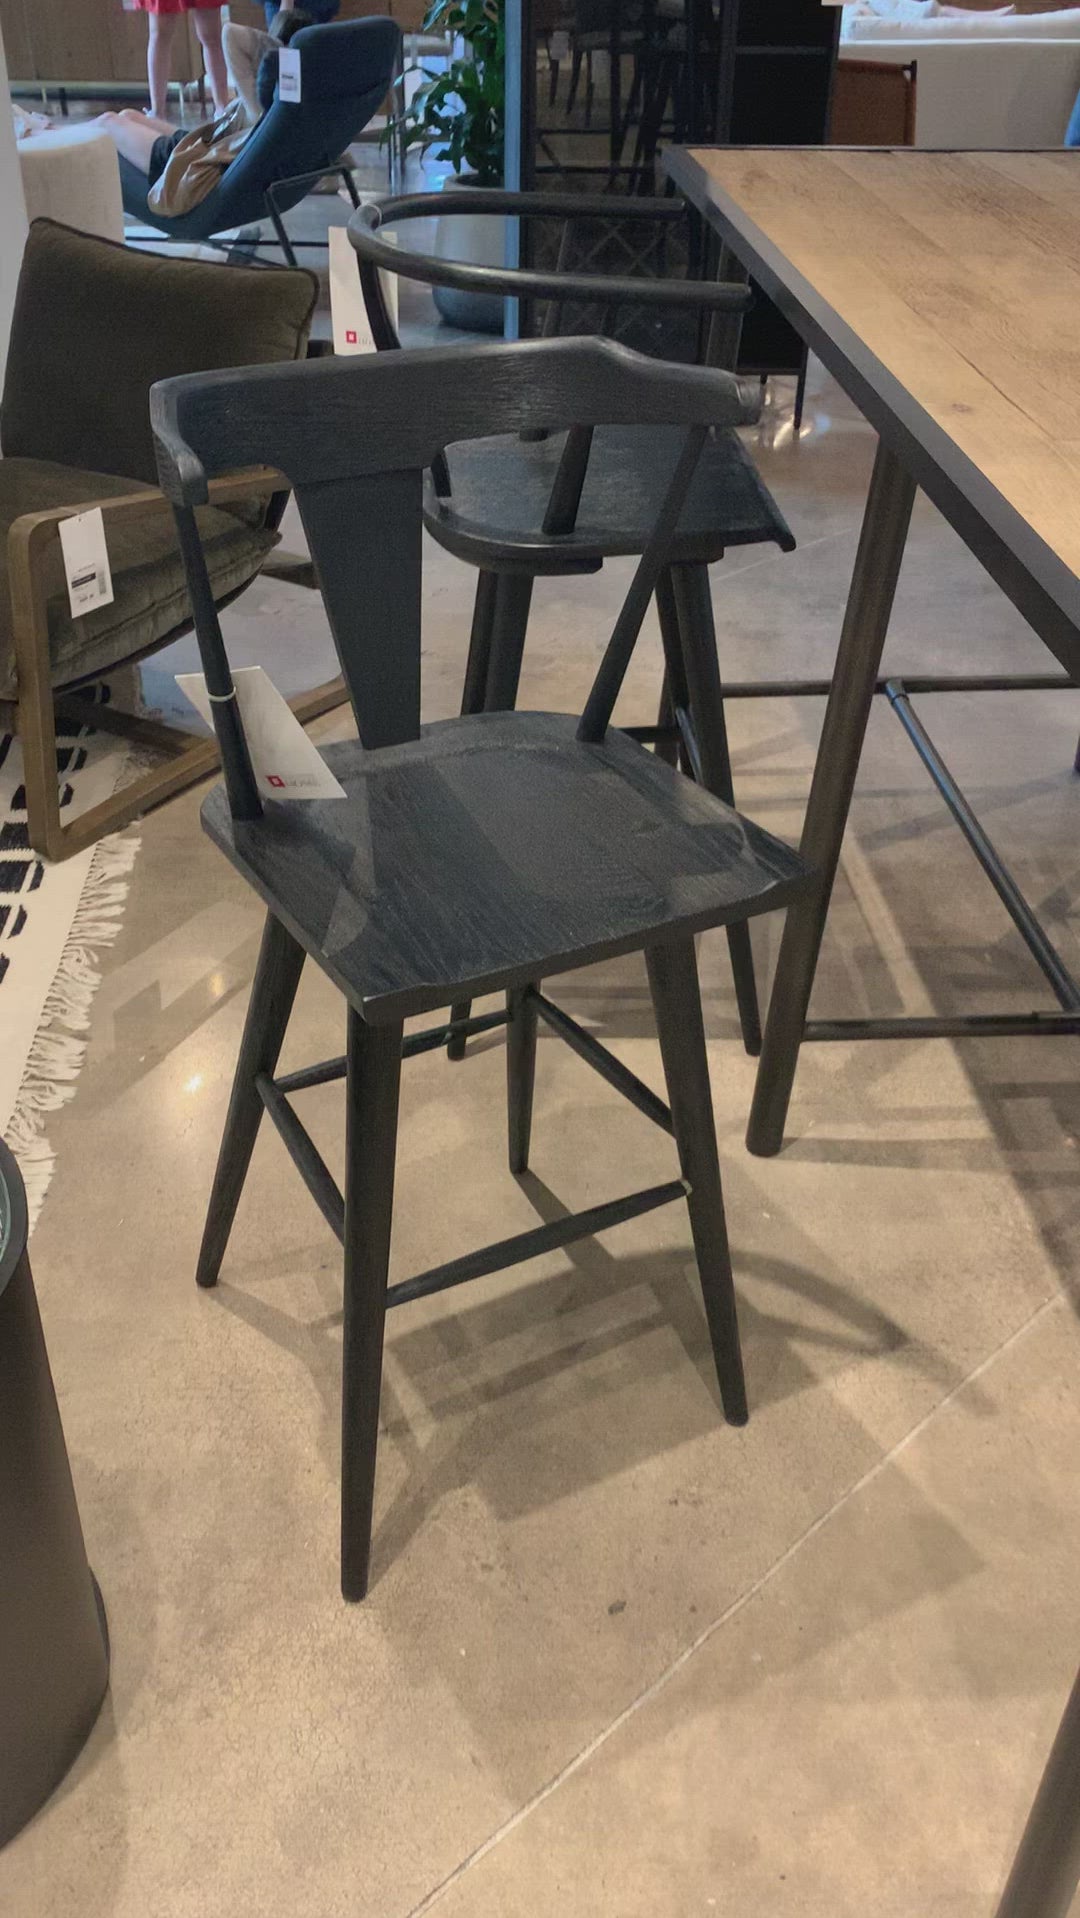 A fresh, bar-style take on mid-century Windsor seating is found in this Ripley Bar + Counter Stool - Black Oak. Featuring a bowed, sculptural silhouette and soft black finish to highlight the natural grain of weathered oak.